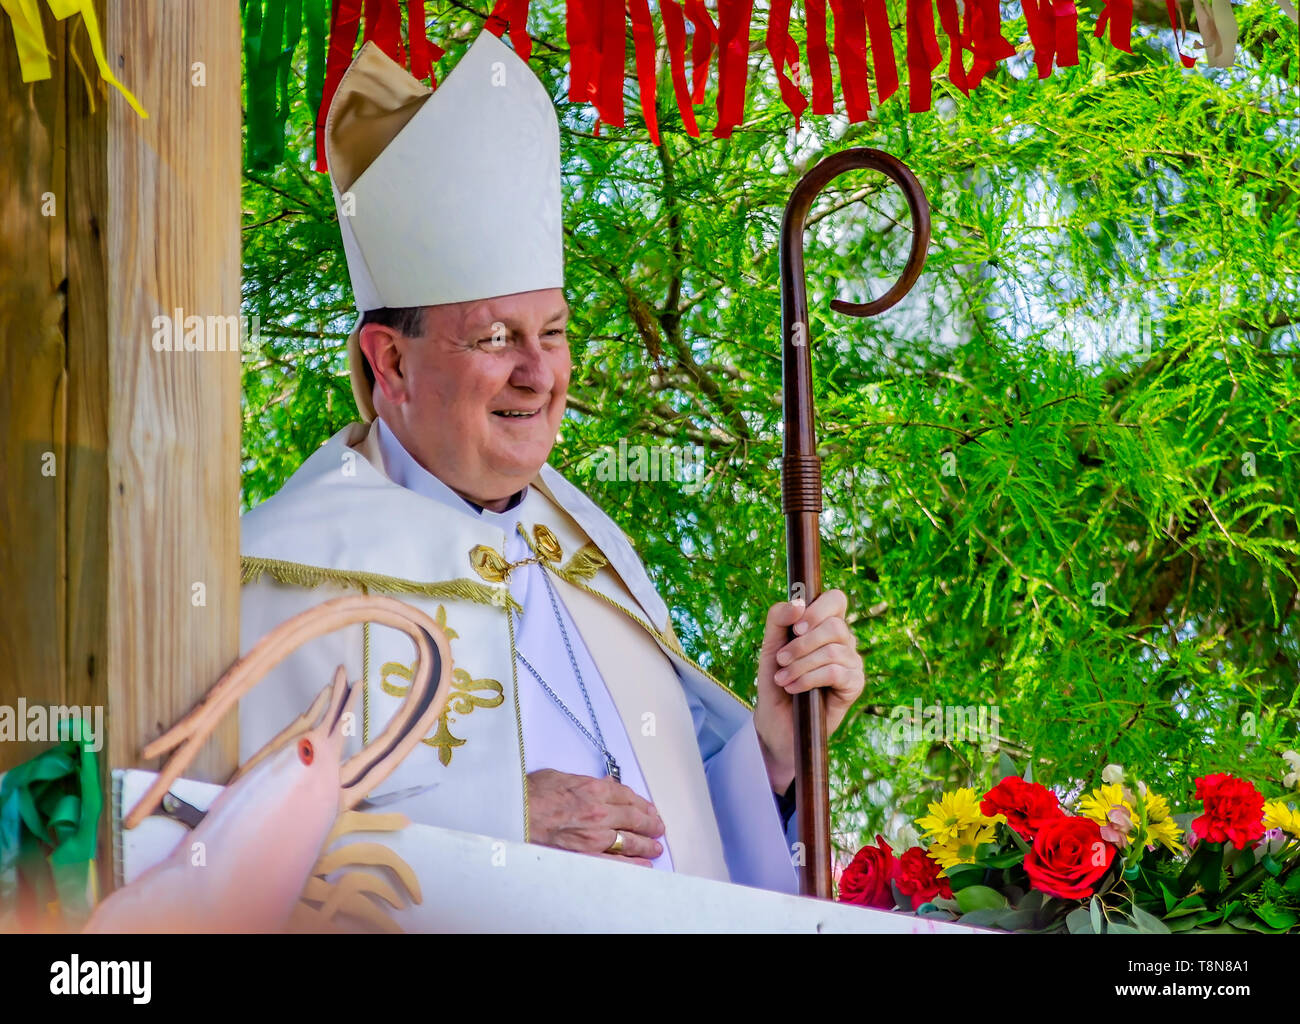 Catholic Archbishop Thomas J. Rodi waits to deliver the blessing of the boats during the 70th annual Blessing of the Fleet in Bayou La Batre, Alabama. Stock Photo